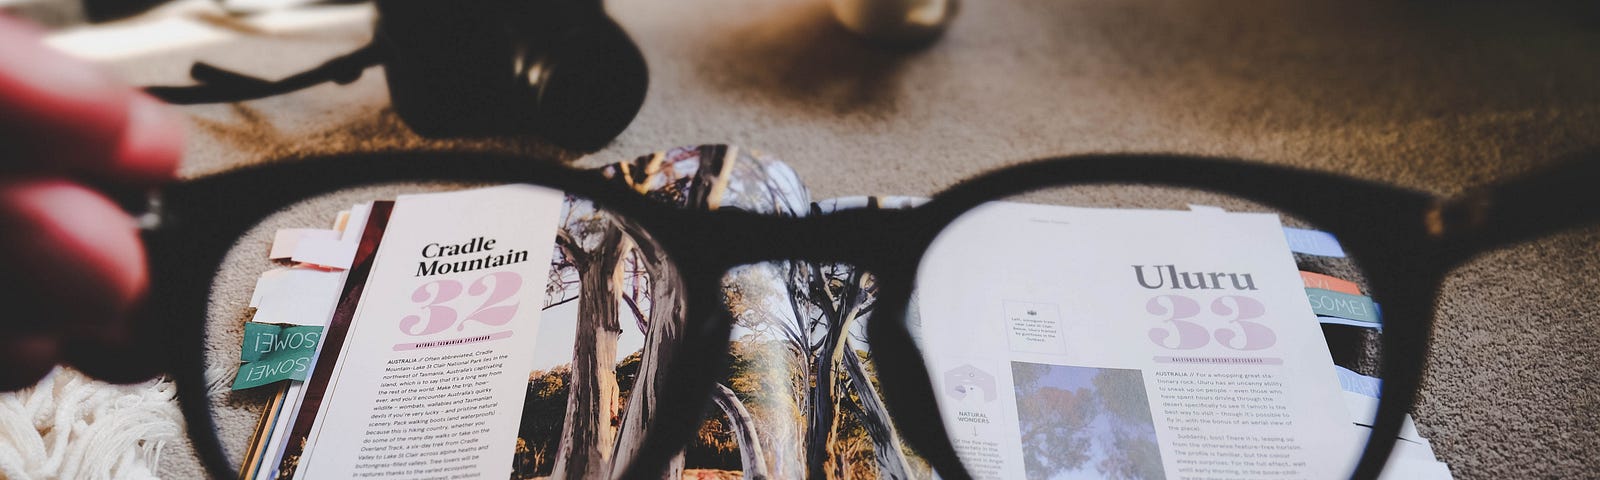 Looking through glasses at an open magazine